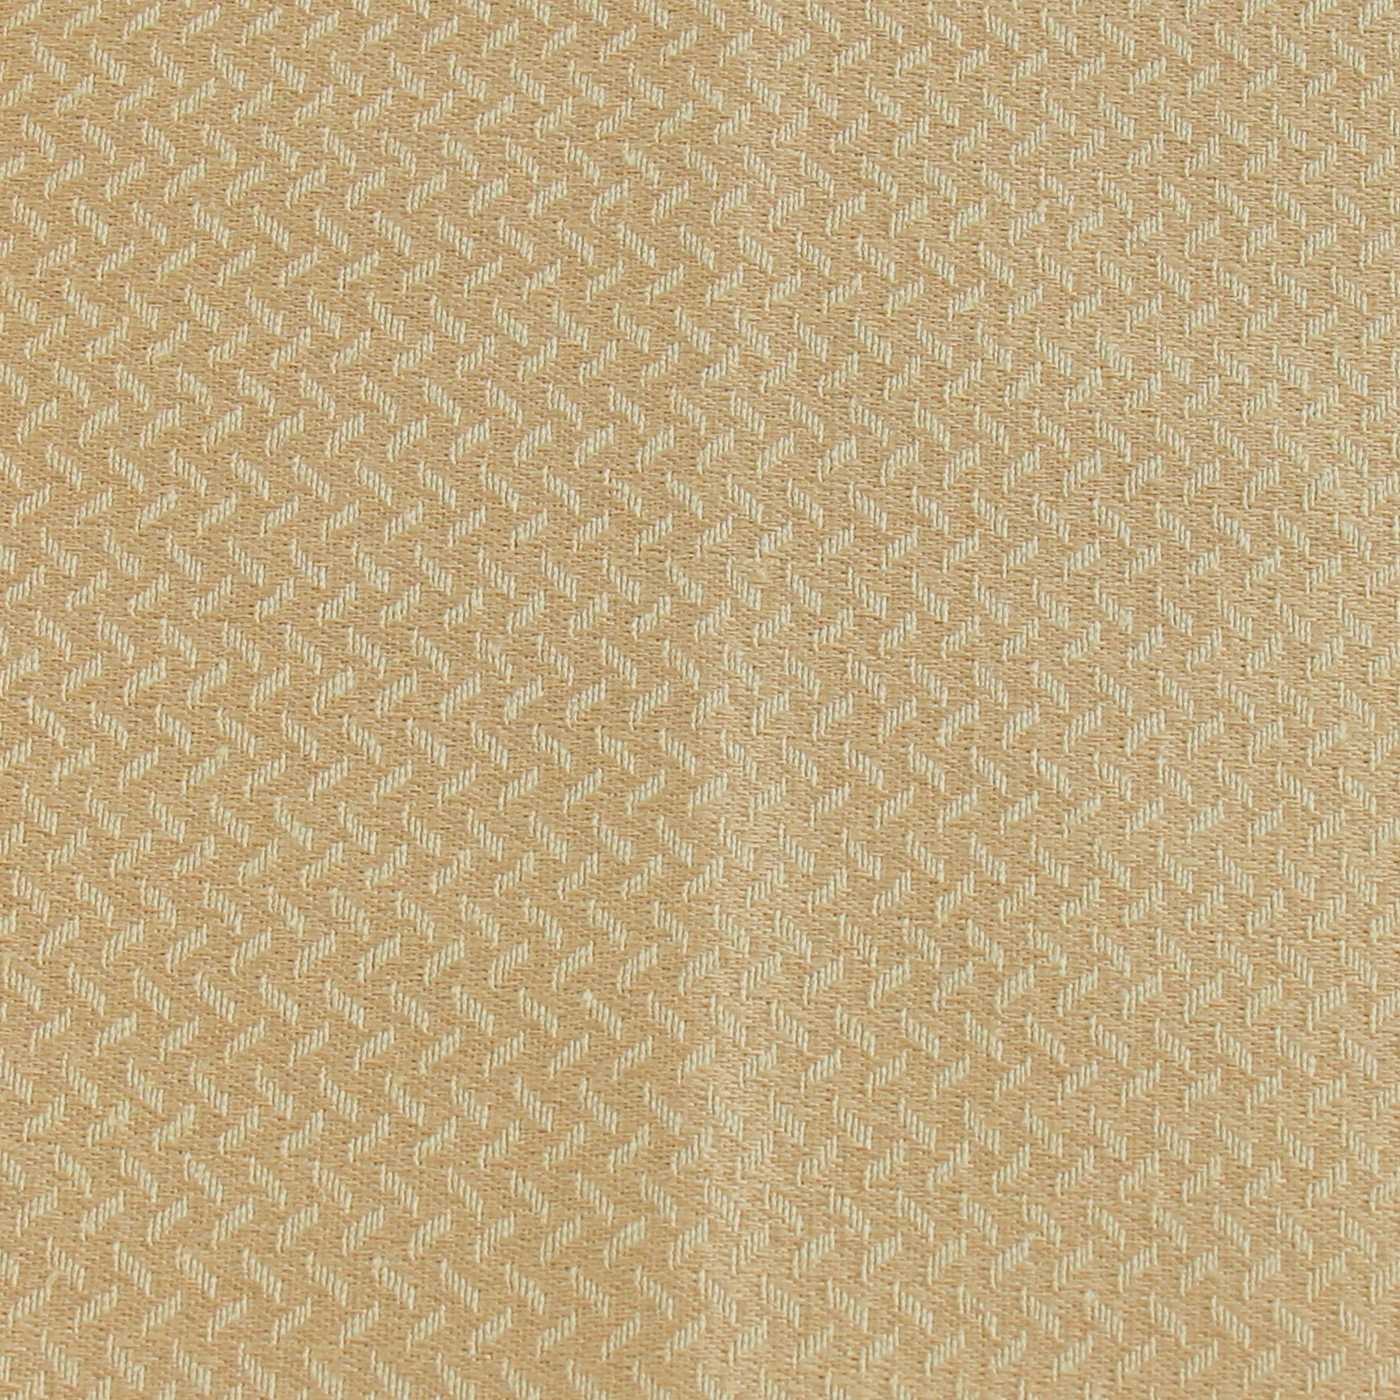 NO 33-45 RS X1 NO 3 Fabric Upholstery Sample